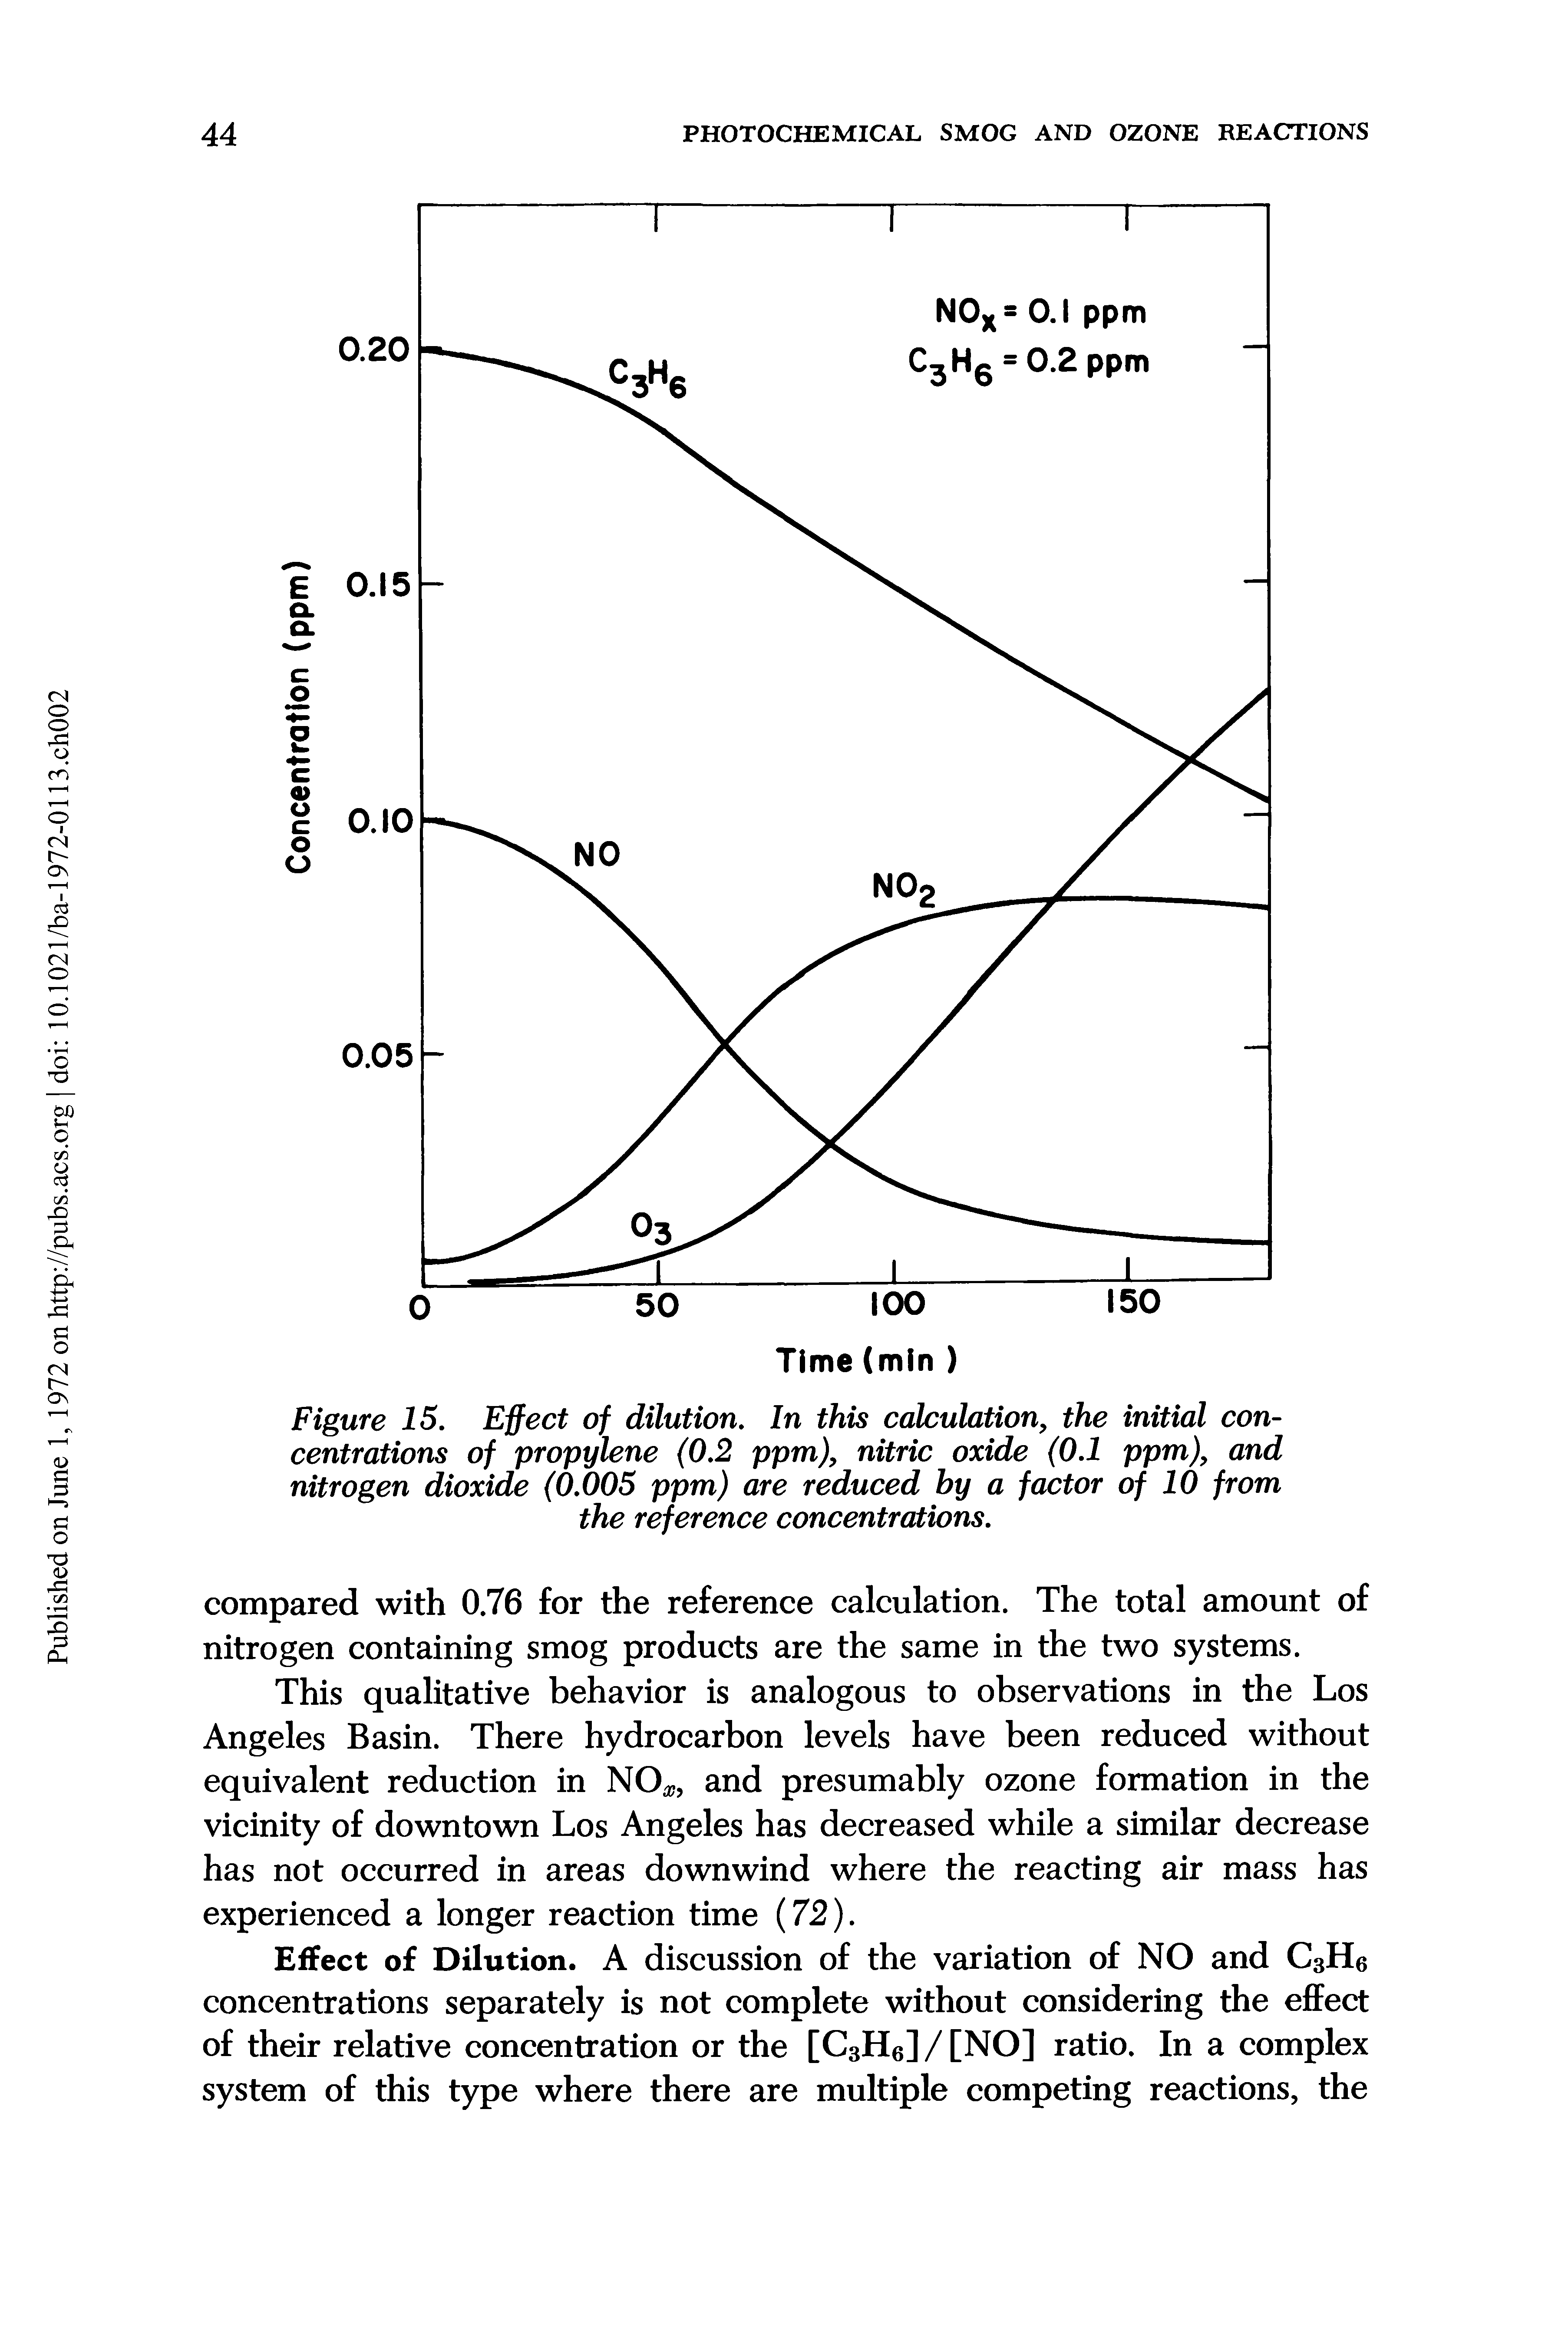 Figure 15. Effect of dilution. In this calculation, the initial concentrations of propylene (0.2 ppm), nitric oxide (0.1 ppm), and nitrogen dioxide (0.005 ppm) are reduced by a factor of 10 from the reference concentrations.